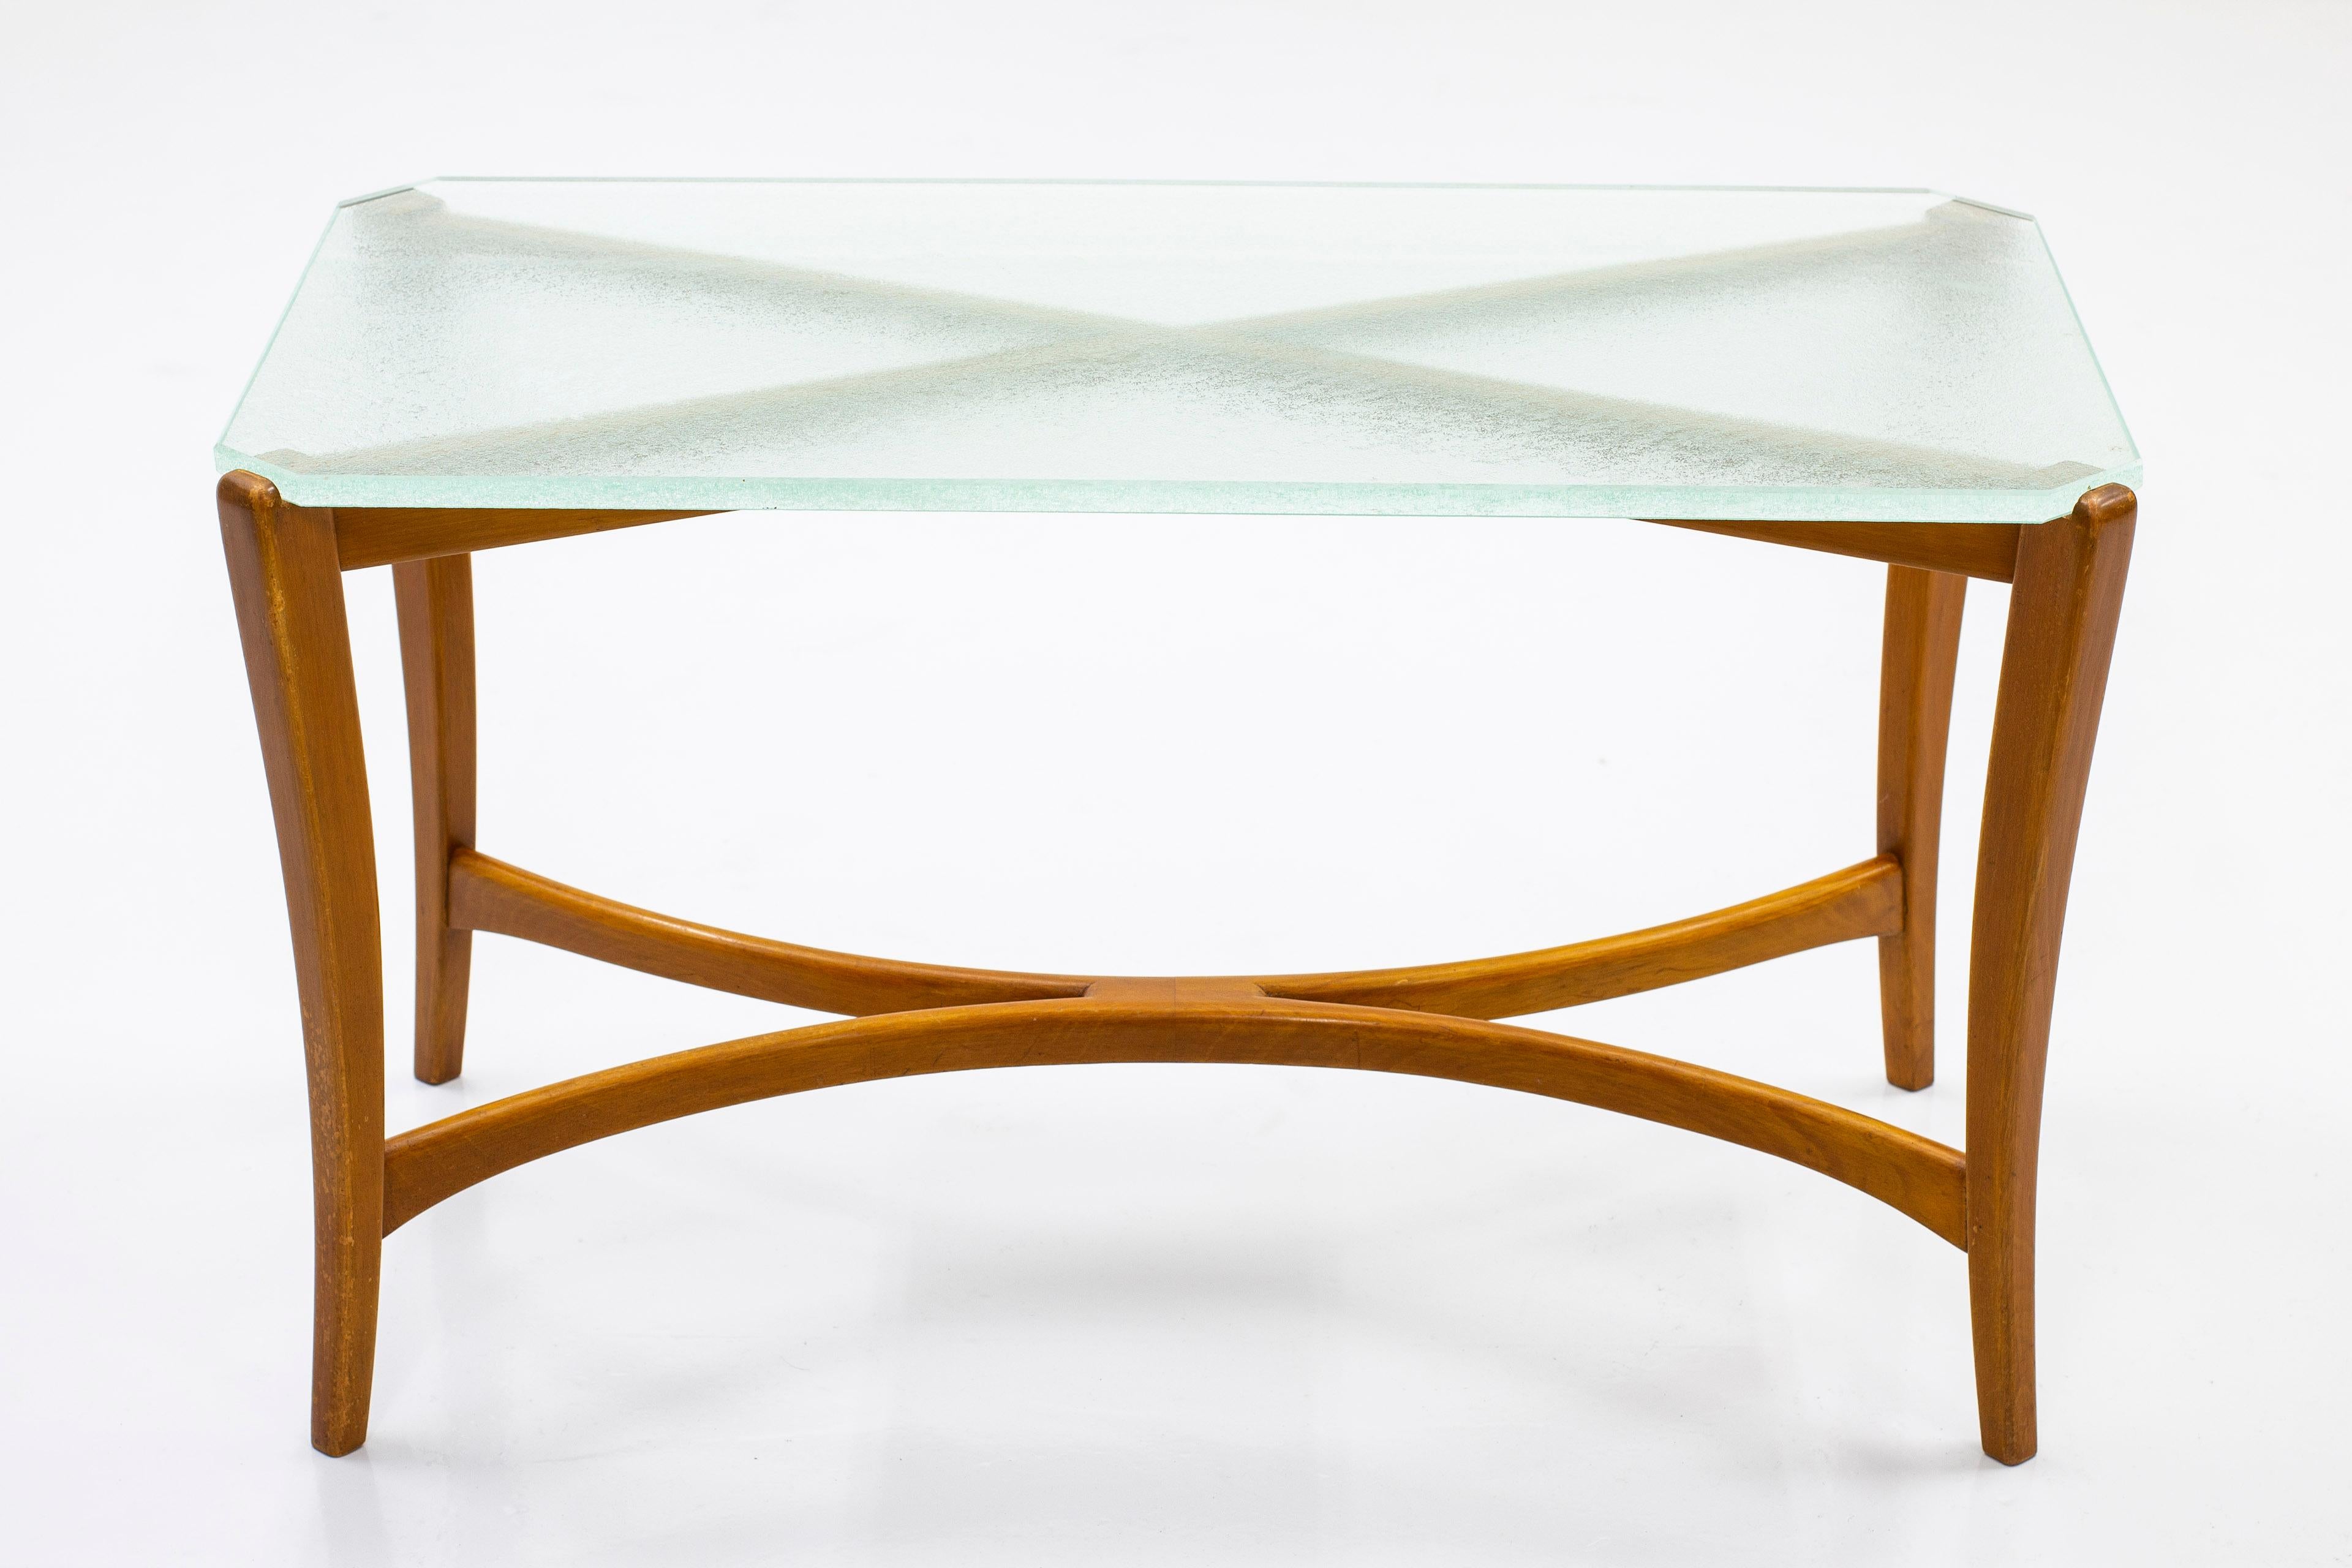 Swedish modern sofa table produced by Nordiska Kompaniet. According to the NK ledger the table is titled 